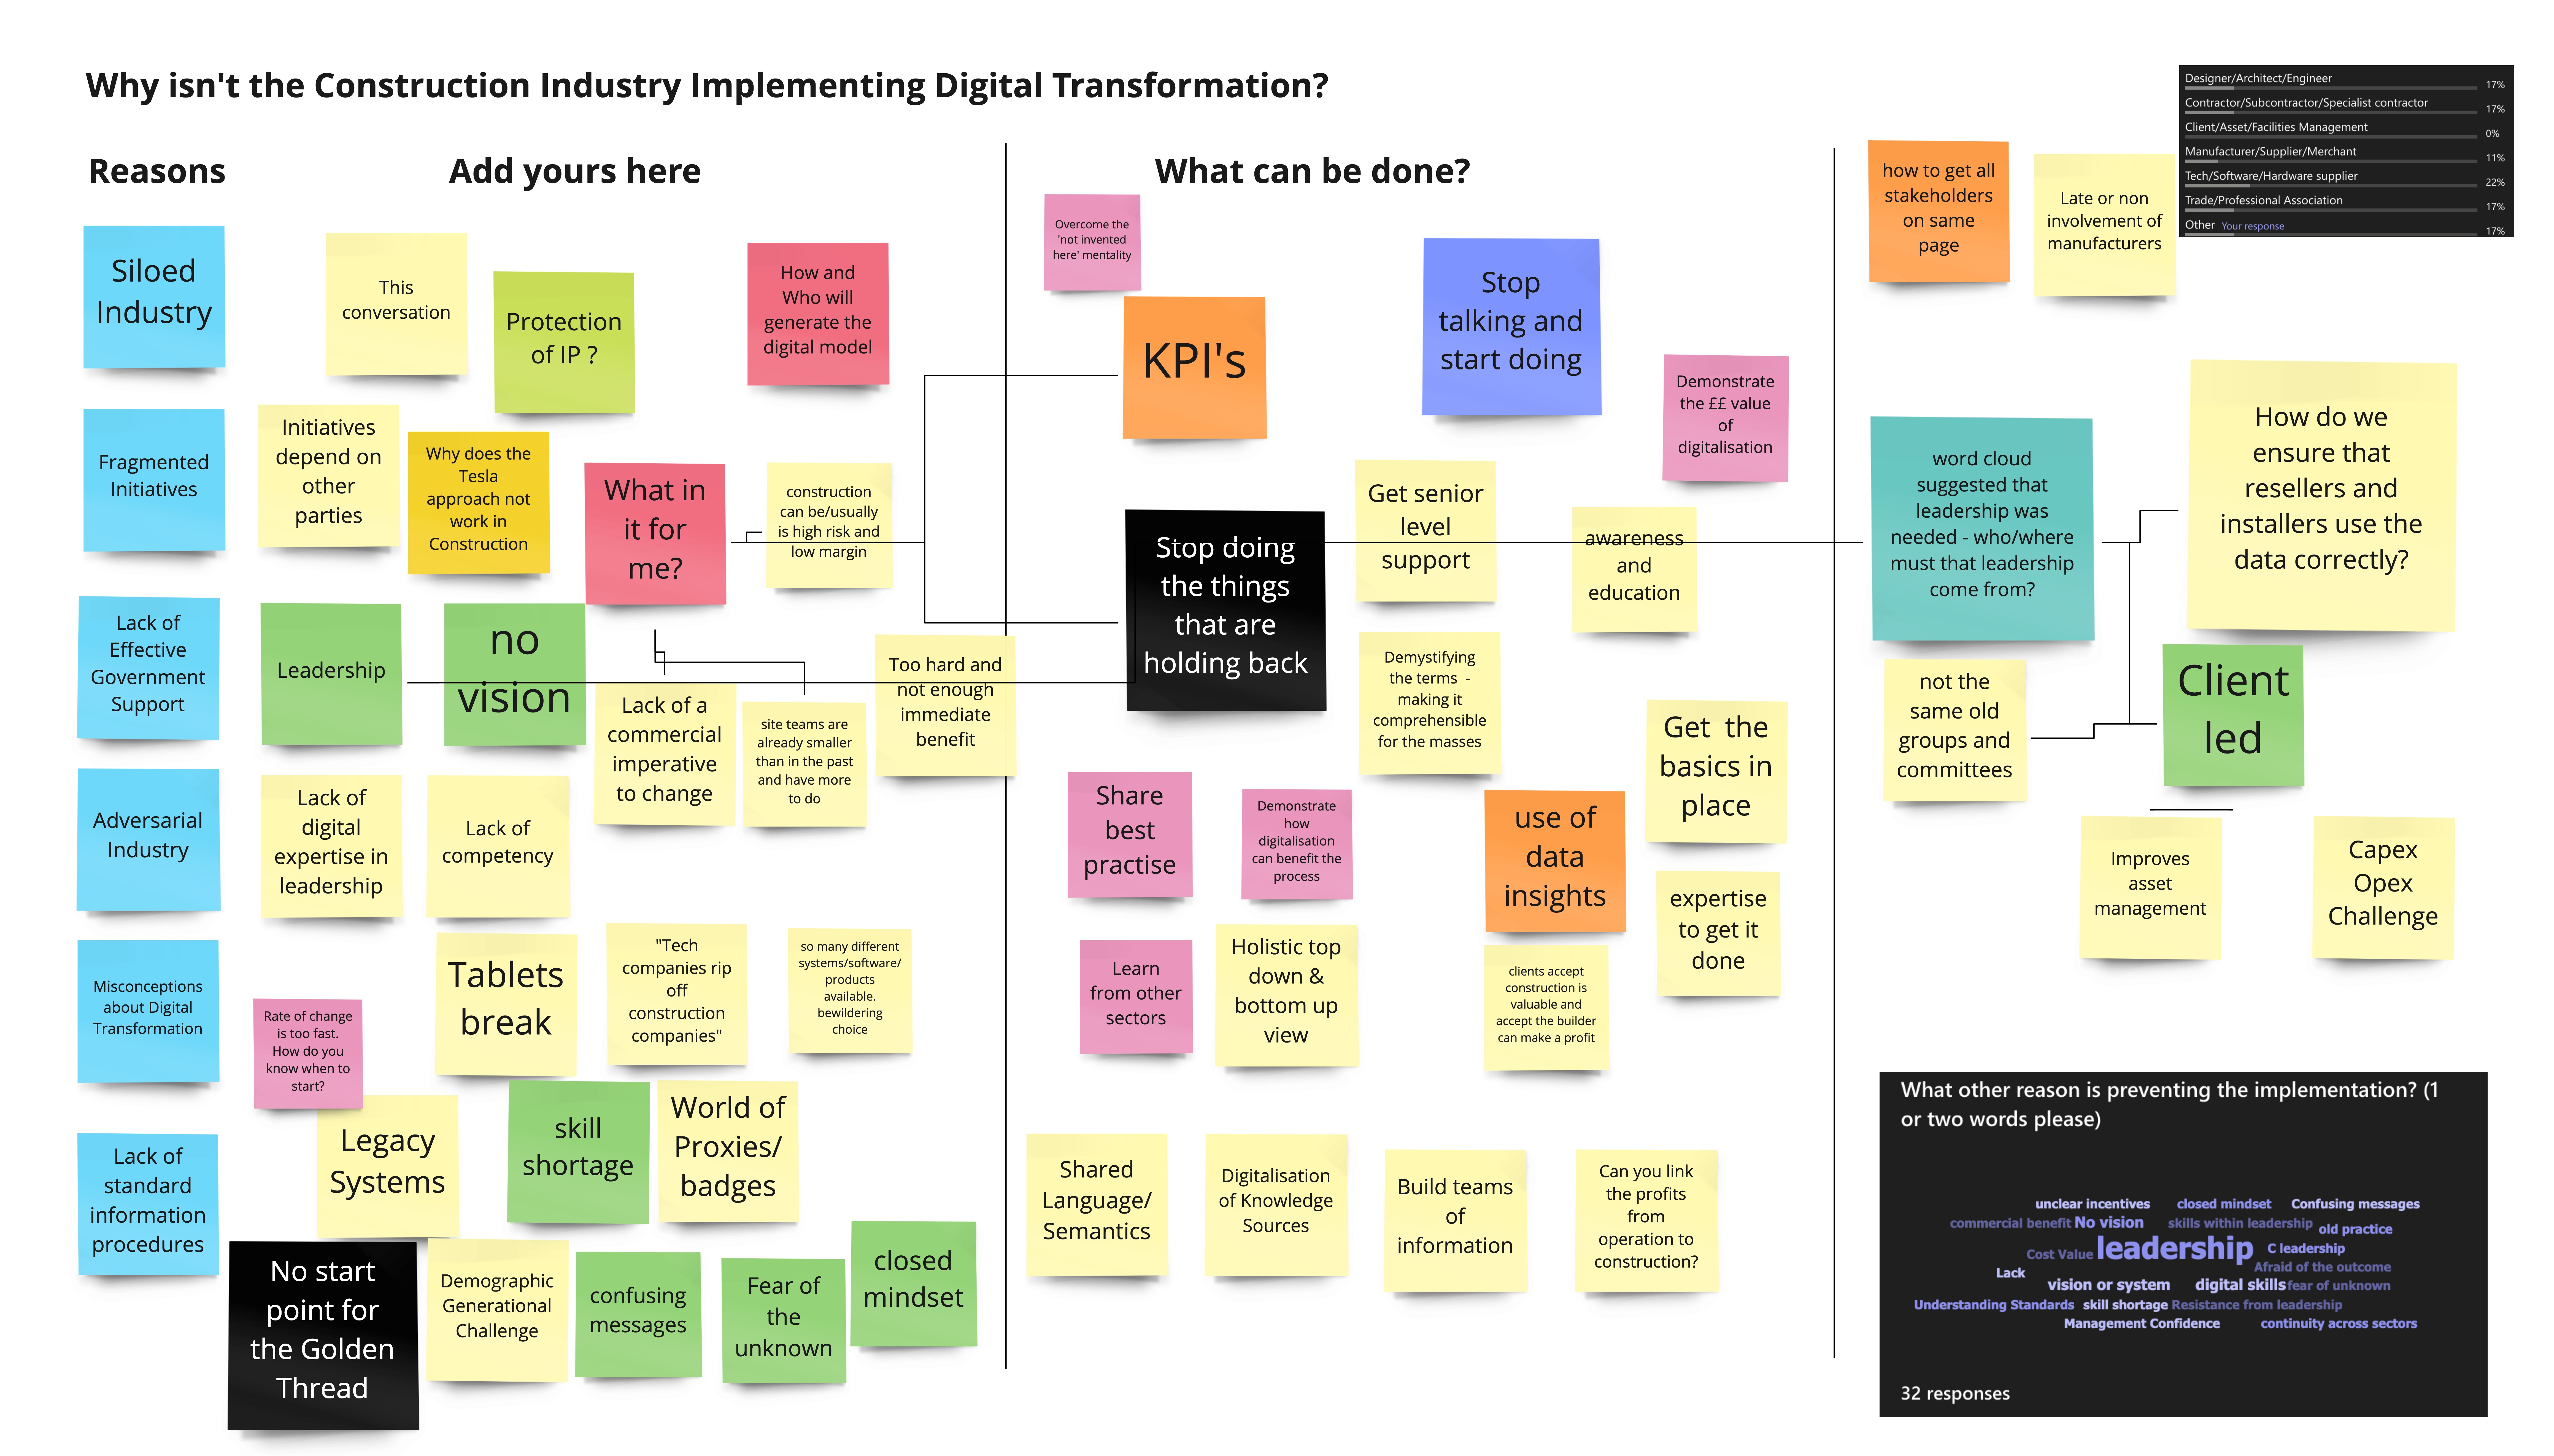 Call Recording: Why isn’t the Construction Sector implementing Digital Transformation?